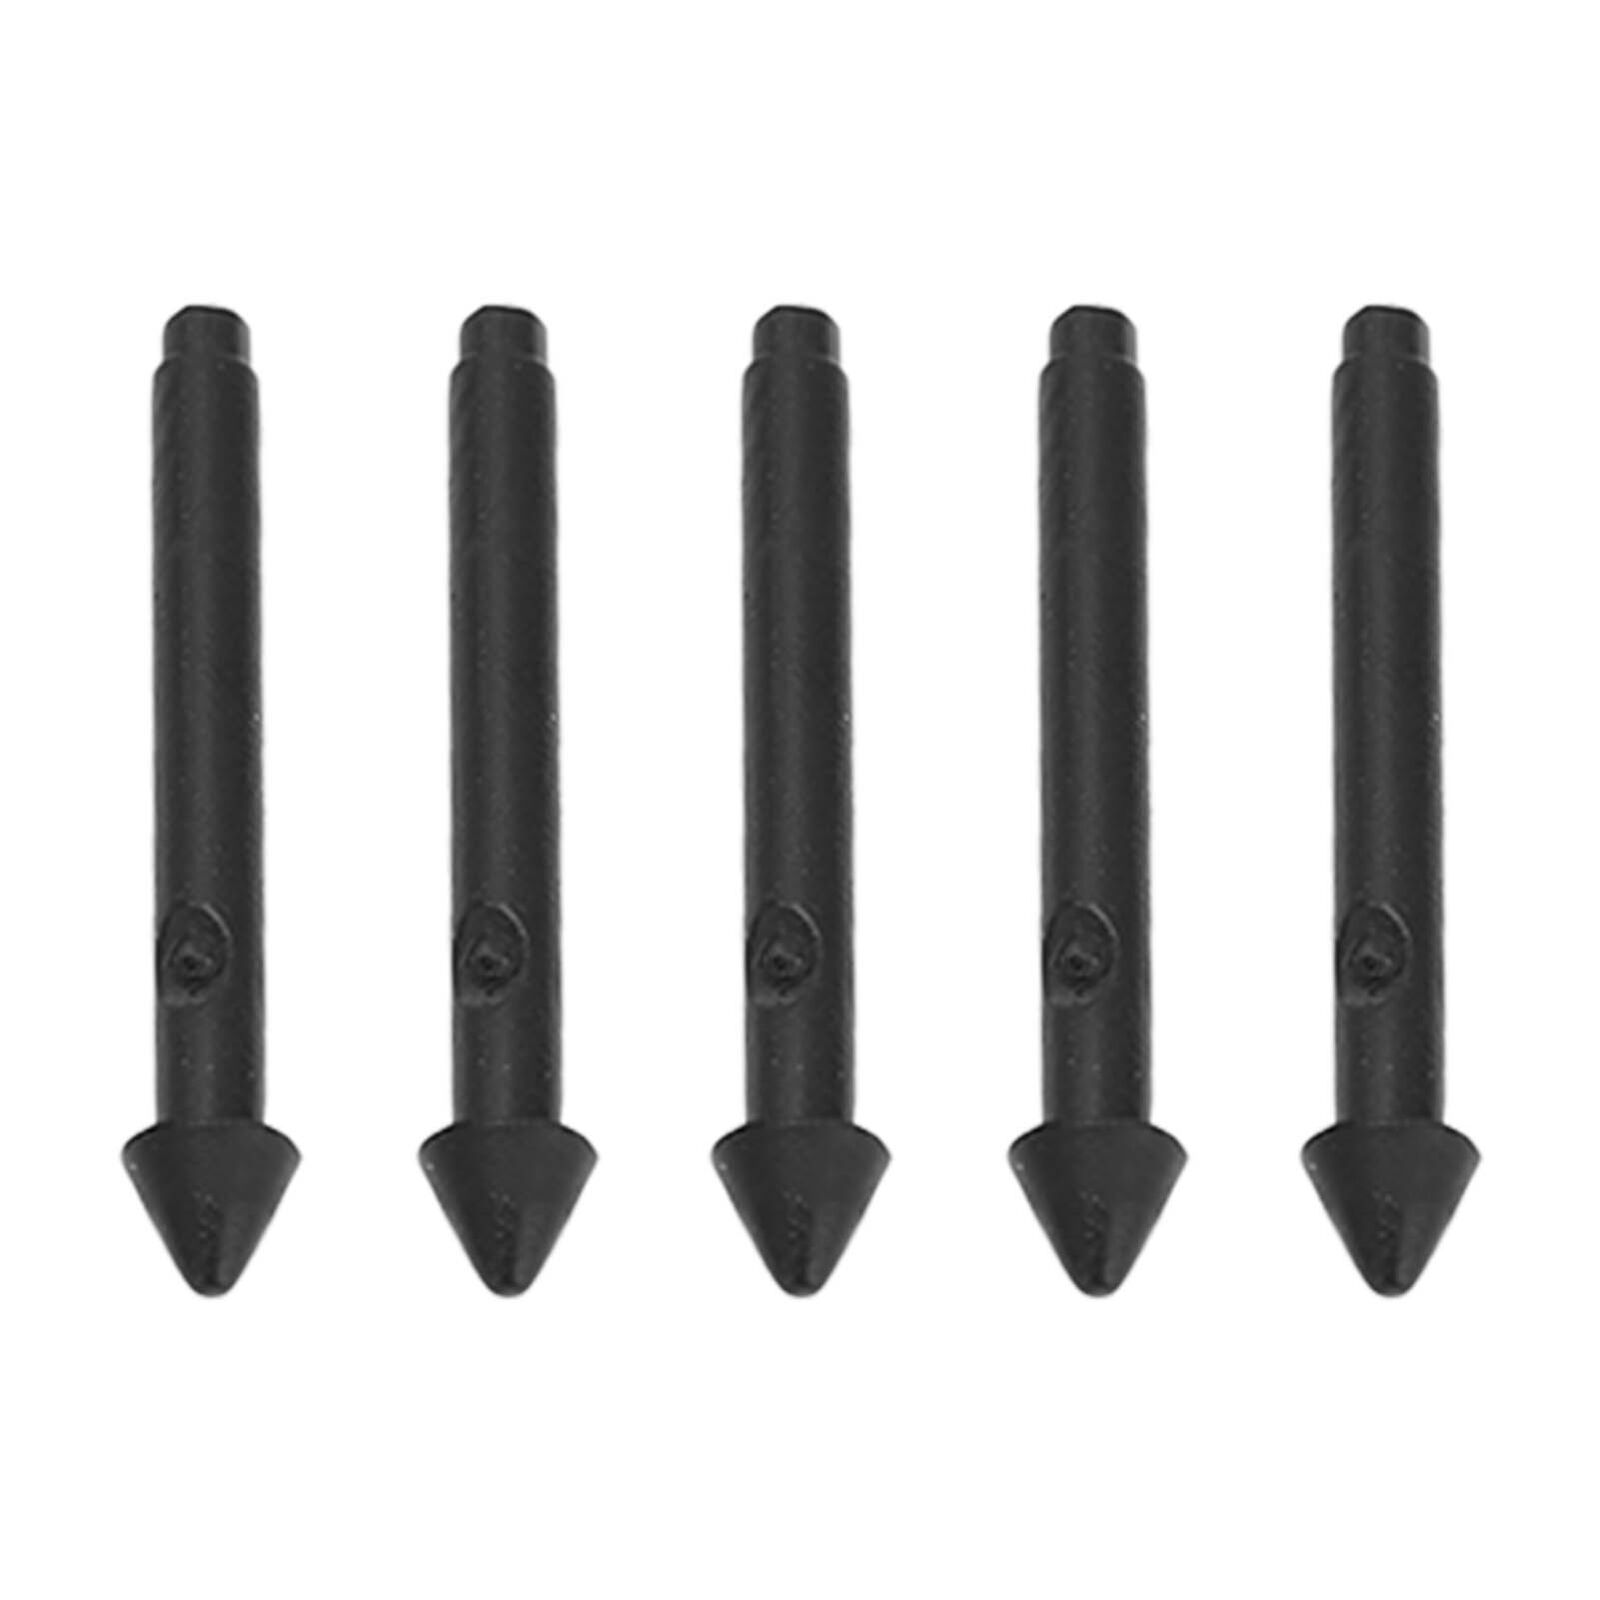 5Pcs Pro Tablet Stylus Pen Tips Black 2H Sensitive Accurate Fine Glossy Tip New